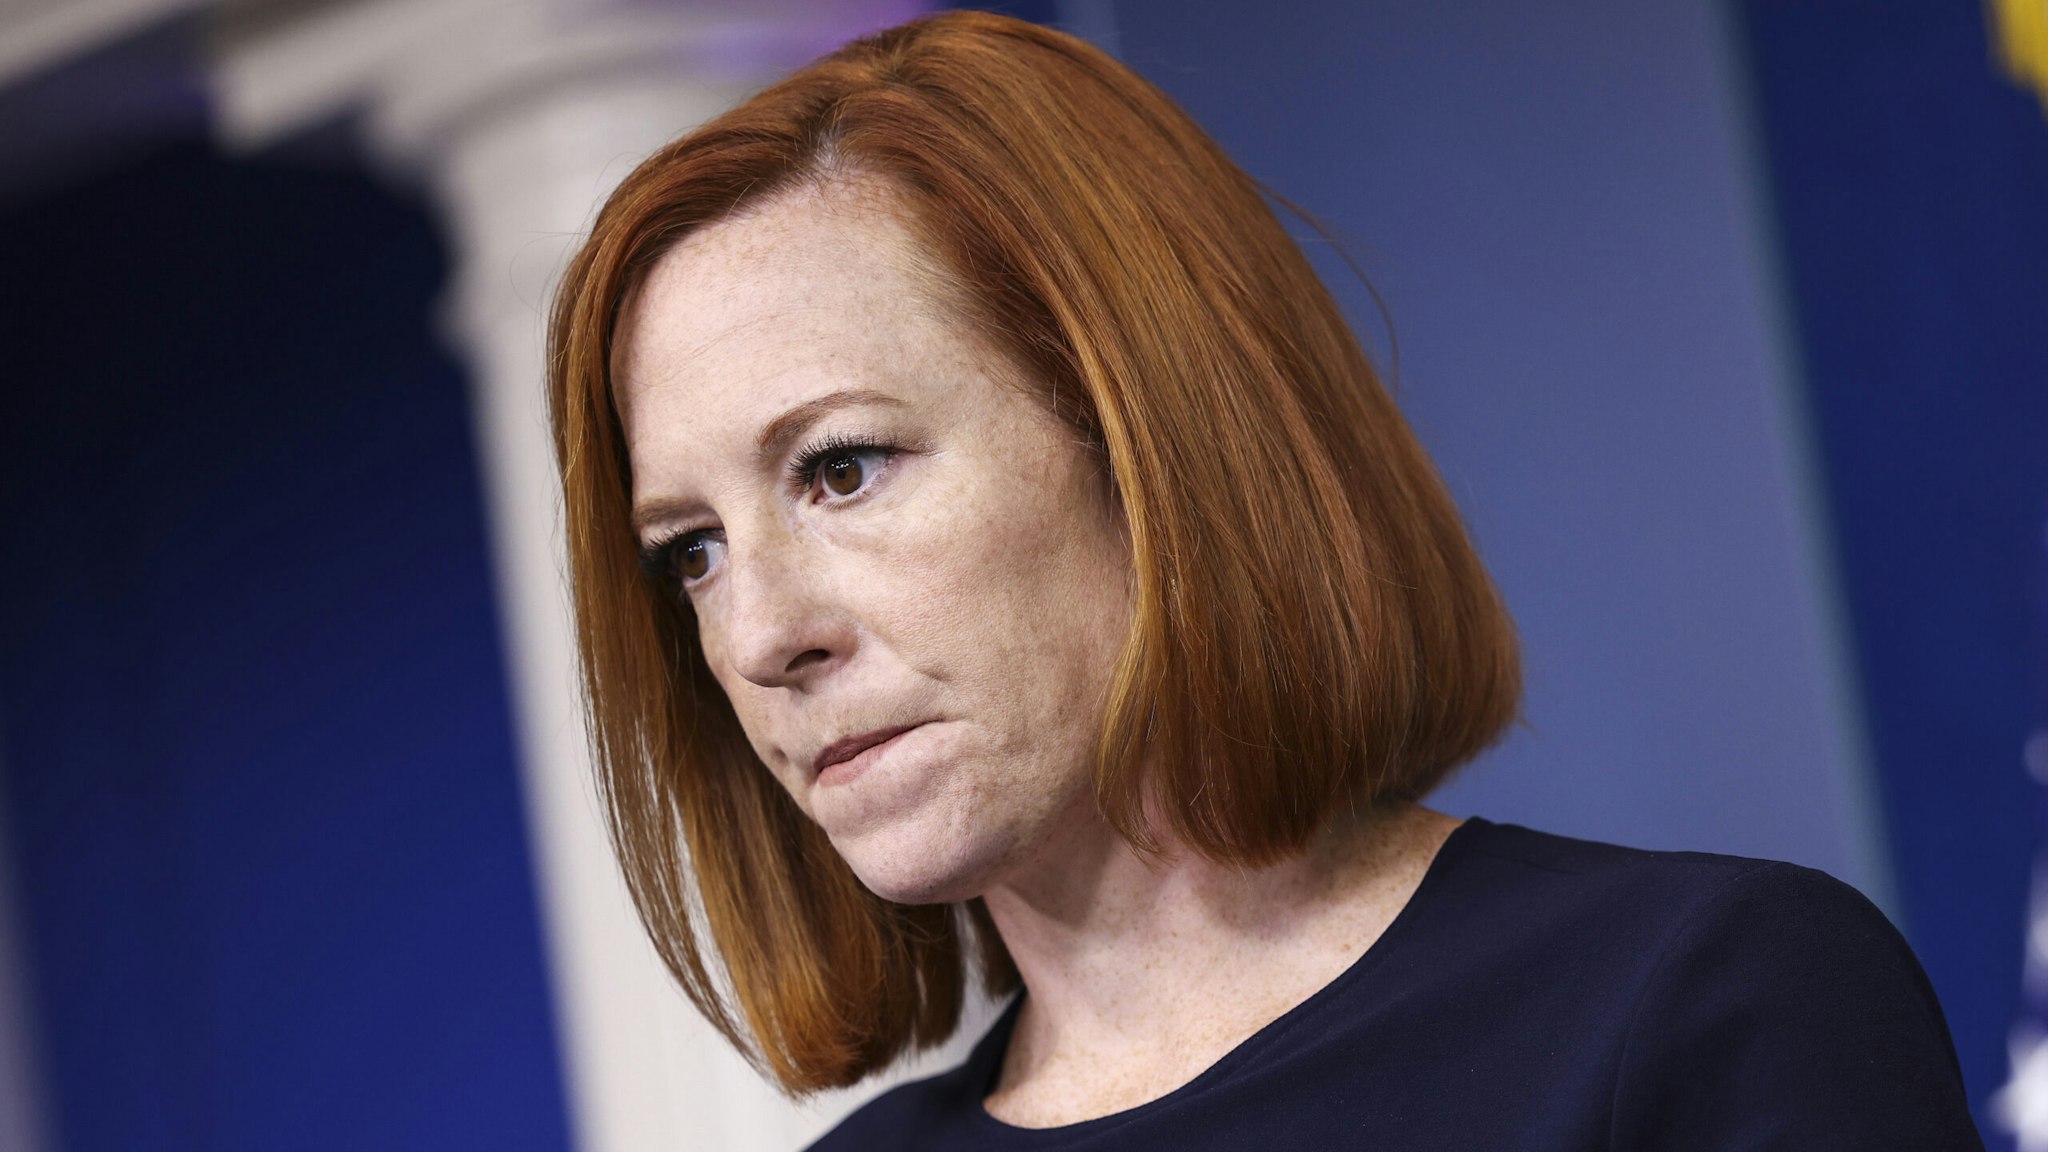 WASHINGTON, DC - OCTOBER 18: White House Press Secretary Jen Psaki speaks during a press briefing at the White House on October 18, 2021 in Washington, DC. Psaki announced that President Biden will hold separate meetings with moderate and progressive House members as part of negotiations for the bipartisan infrastructure bill.